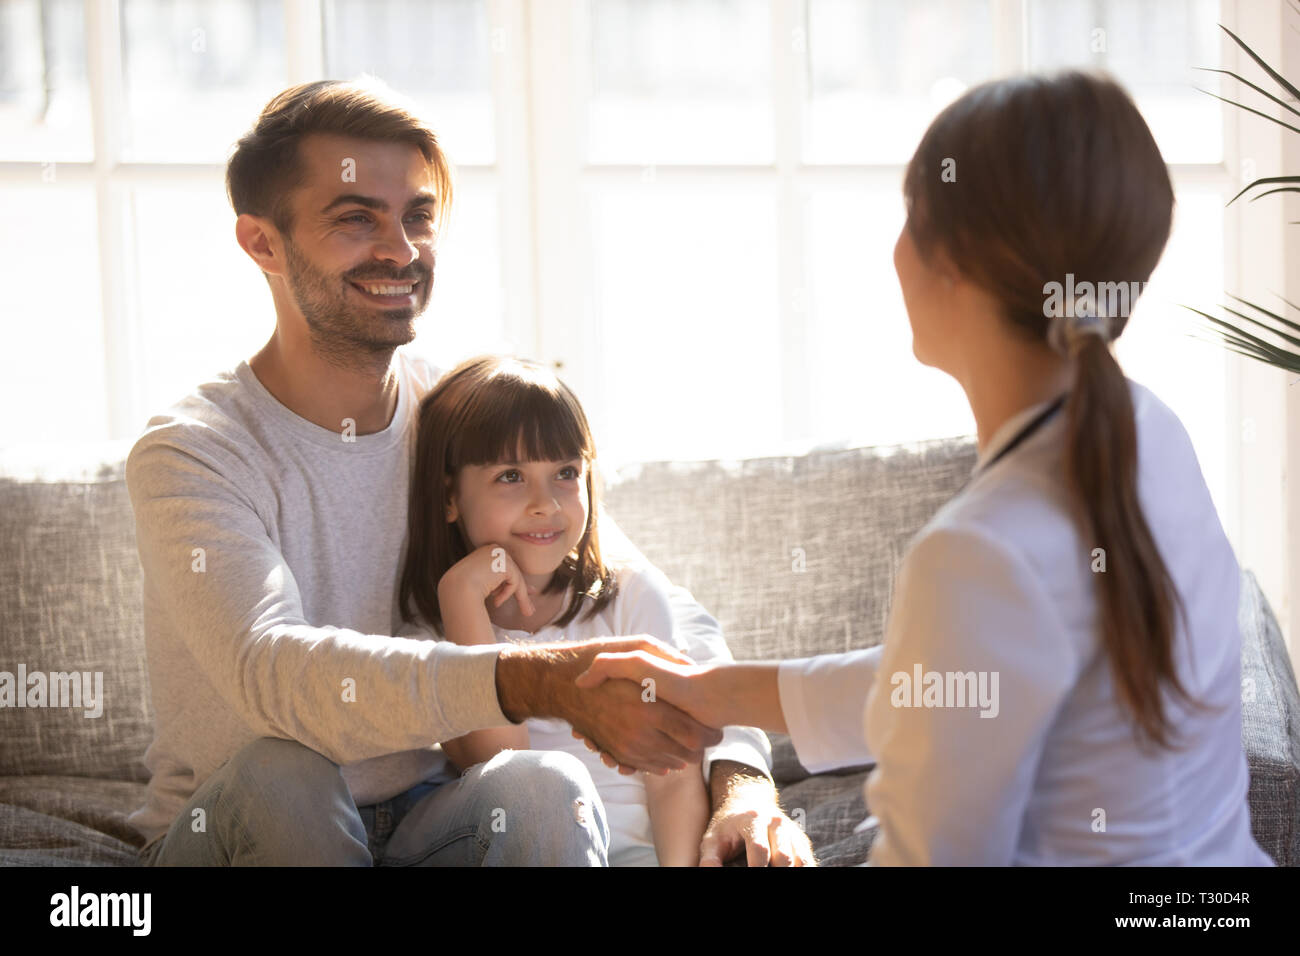 Daughter with father having visit paediatrics handshaking with paediatrician Stock Photo